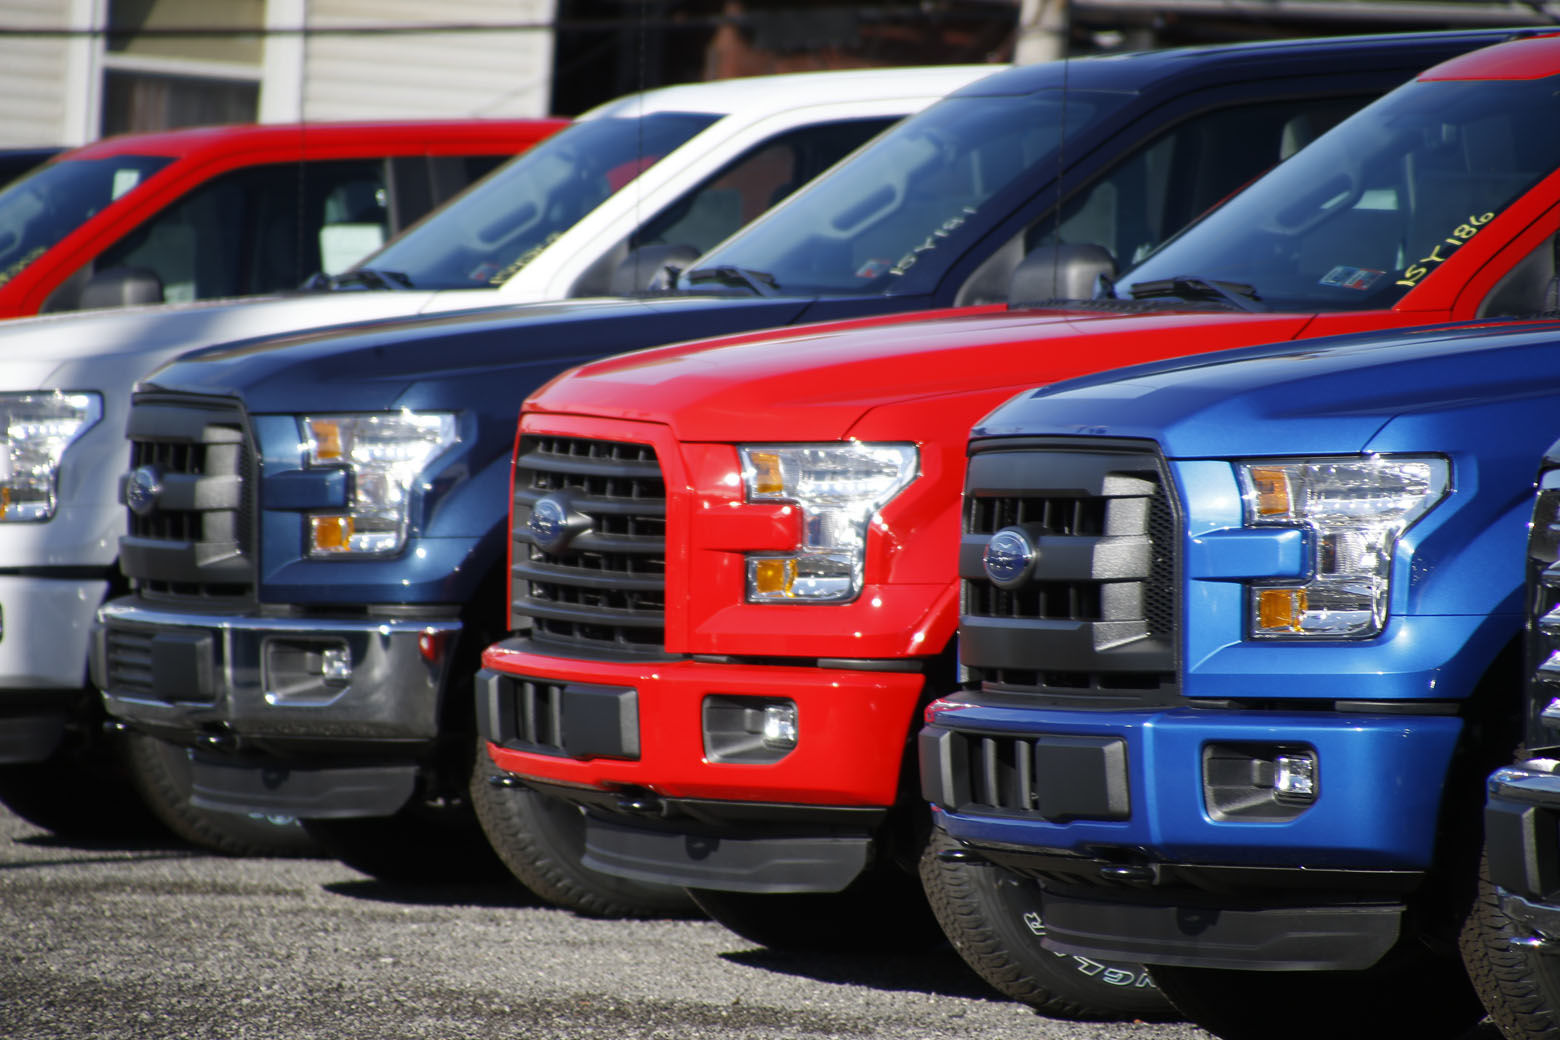 FILE- In this Nov. 19, 2015, file photo a row of 2015 Ford F-150 pickup trucks are parked on the sales lot at Butler County Ford in Butler, Pa. Under pressure from U.S. safety regulators, Ford is recalling about 2 million F-150 pickups in North America because the seat belts can cause fires. The recall covers certain trucks from the 2015 through 2018 model years. (AP Photo/Keith Srakocic, File)